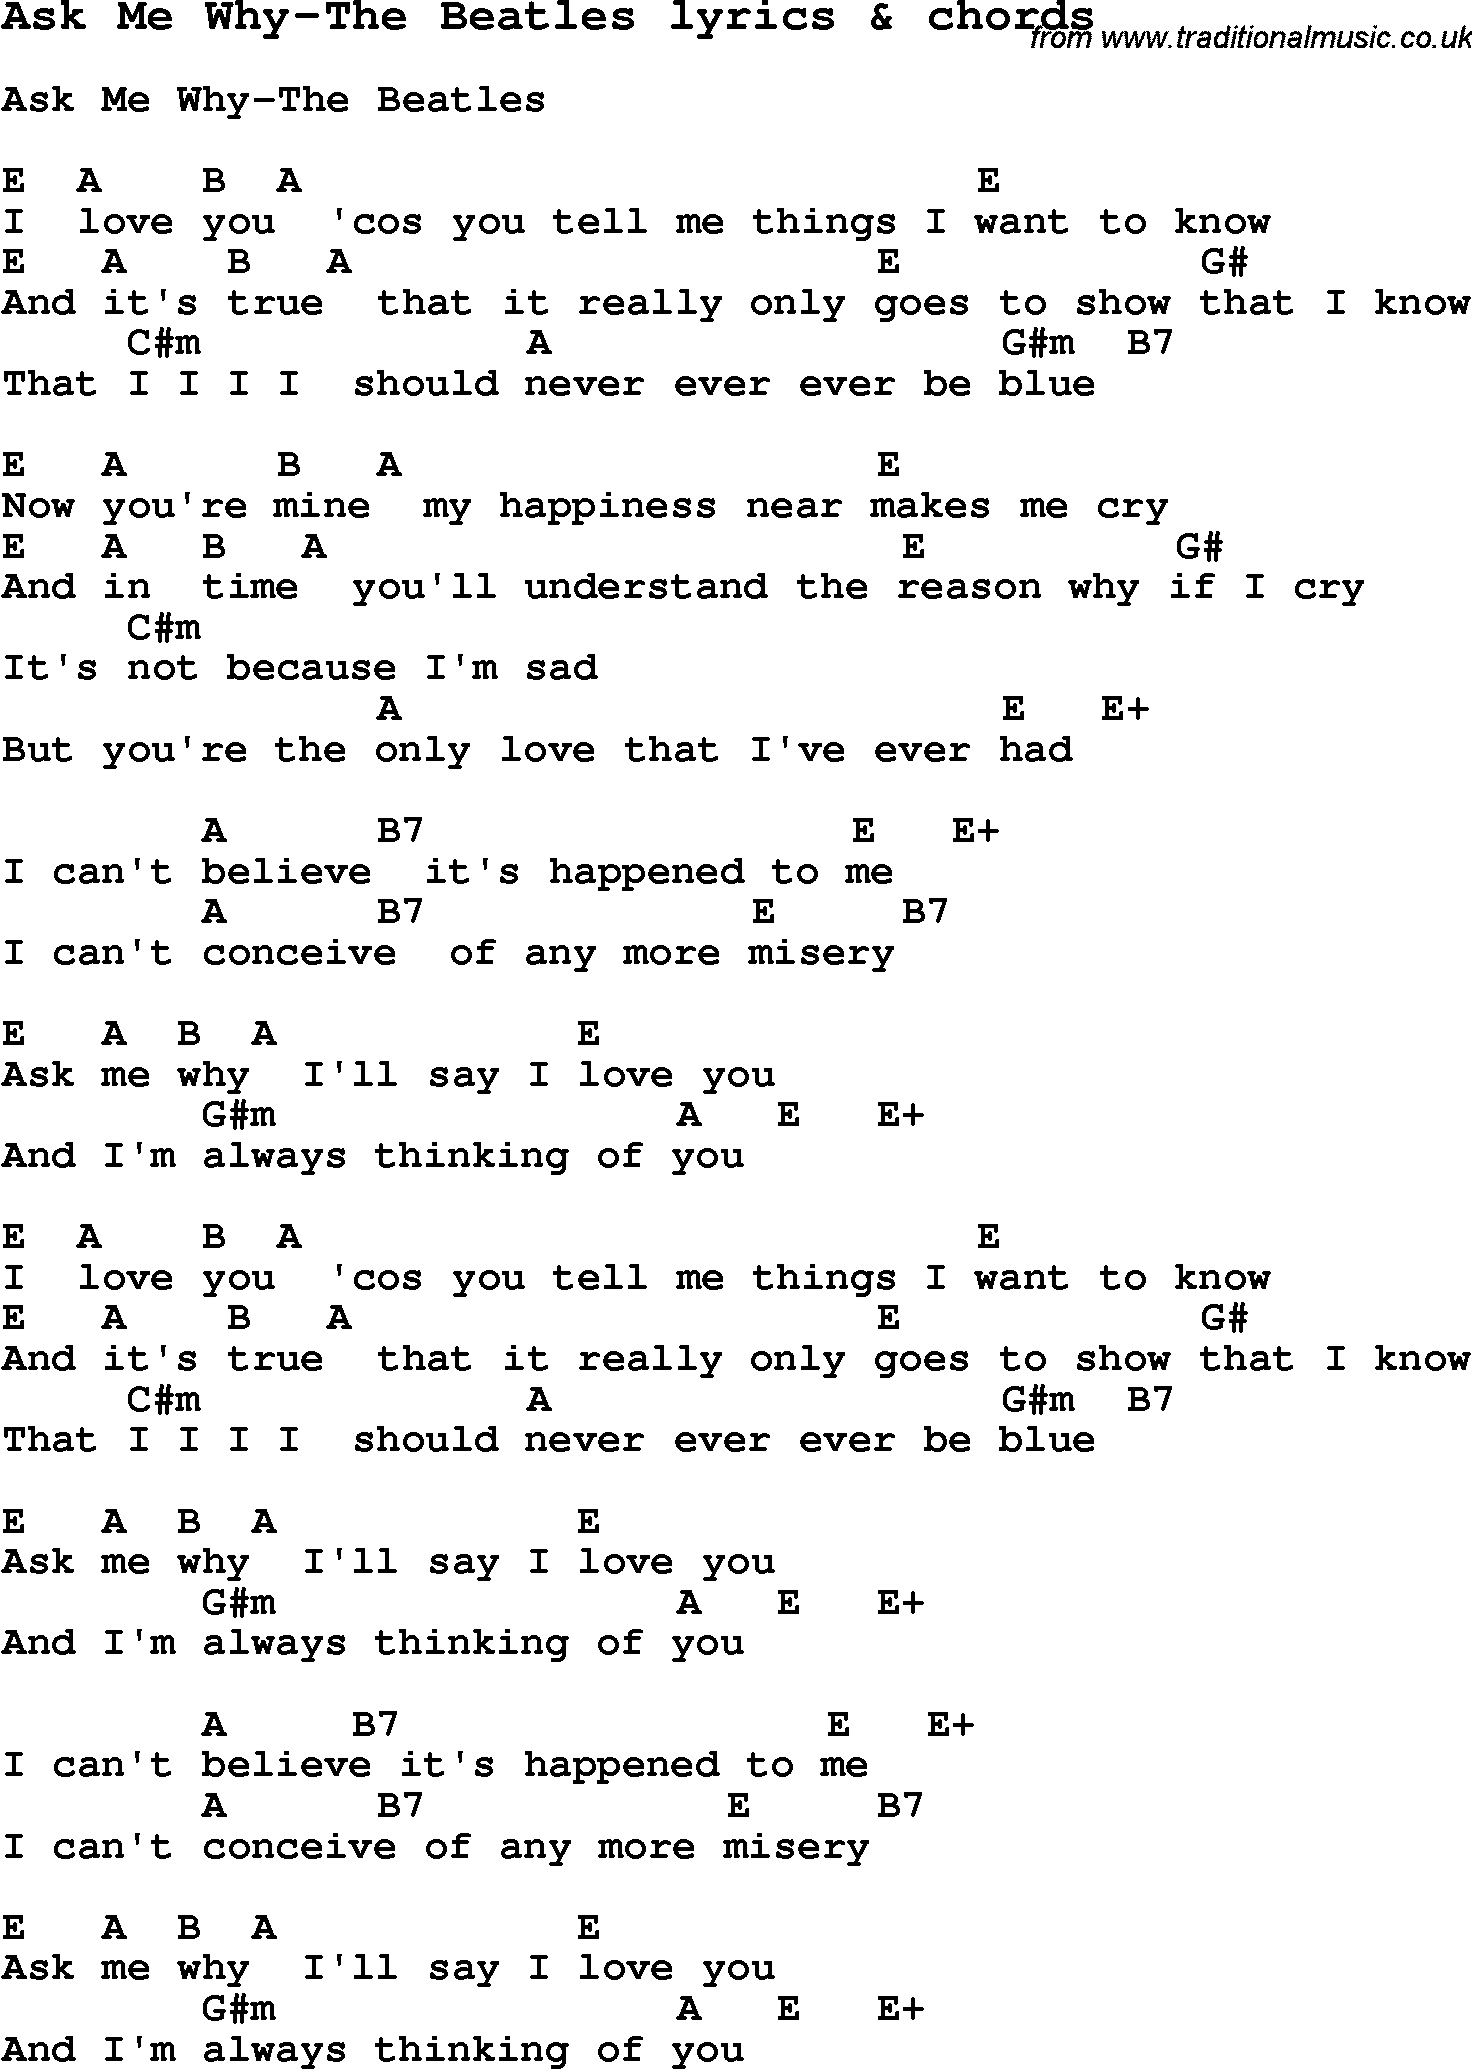 Love Song Lyrics for: Ask Me Why-The Beatles with chords for Ukulele, Guitar Banjo etc.